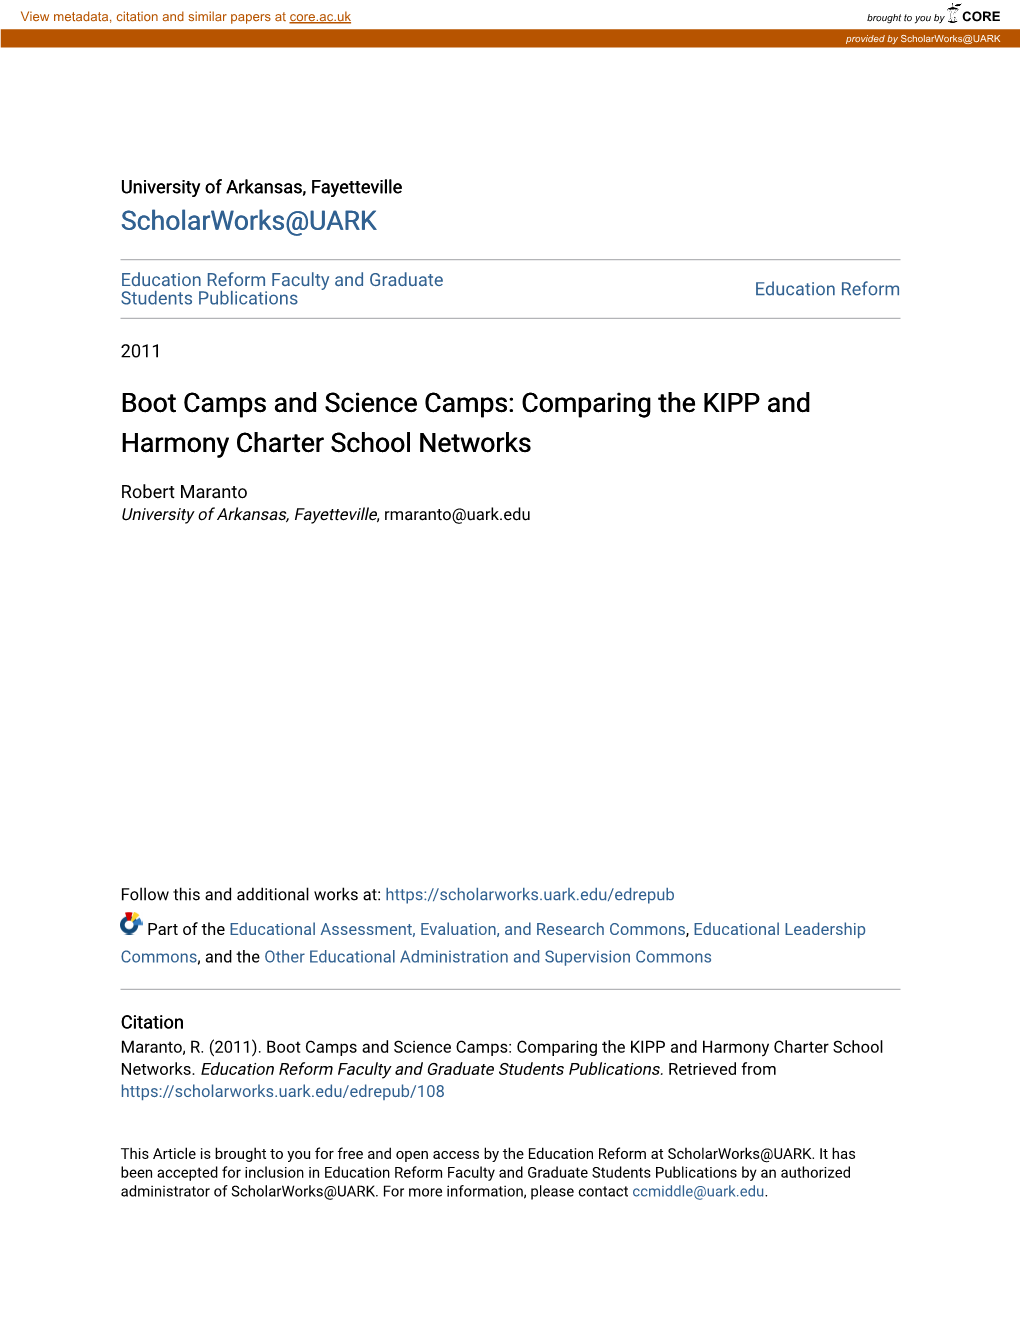 Comparing the KIPP and Harmony Charter School Networks